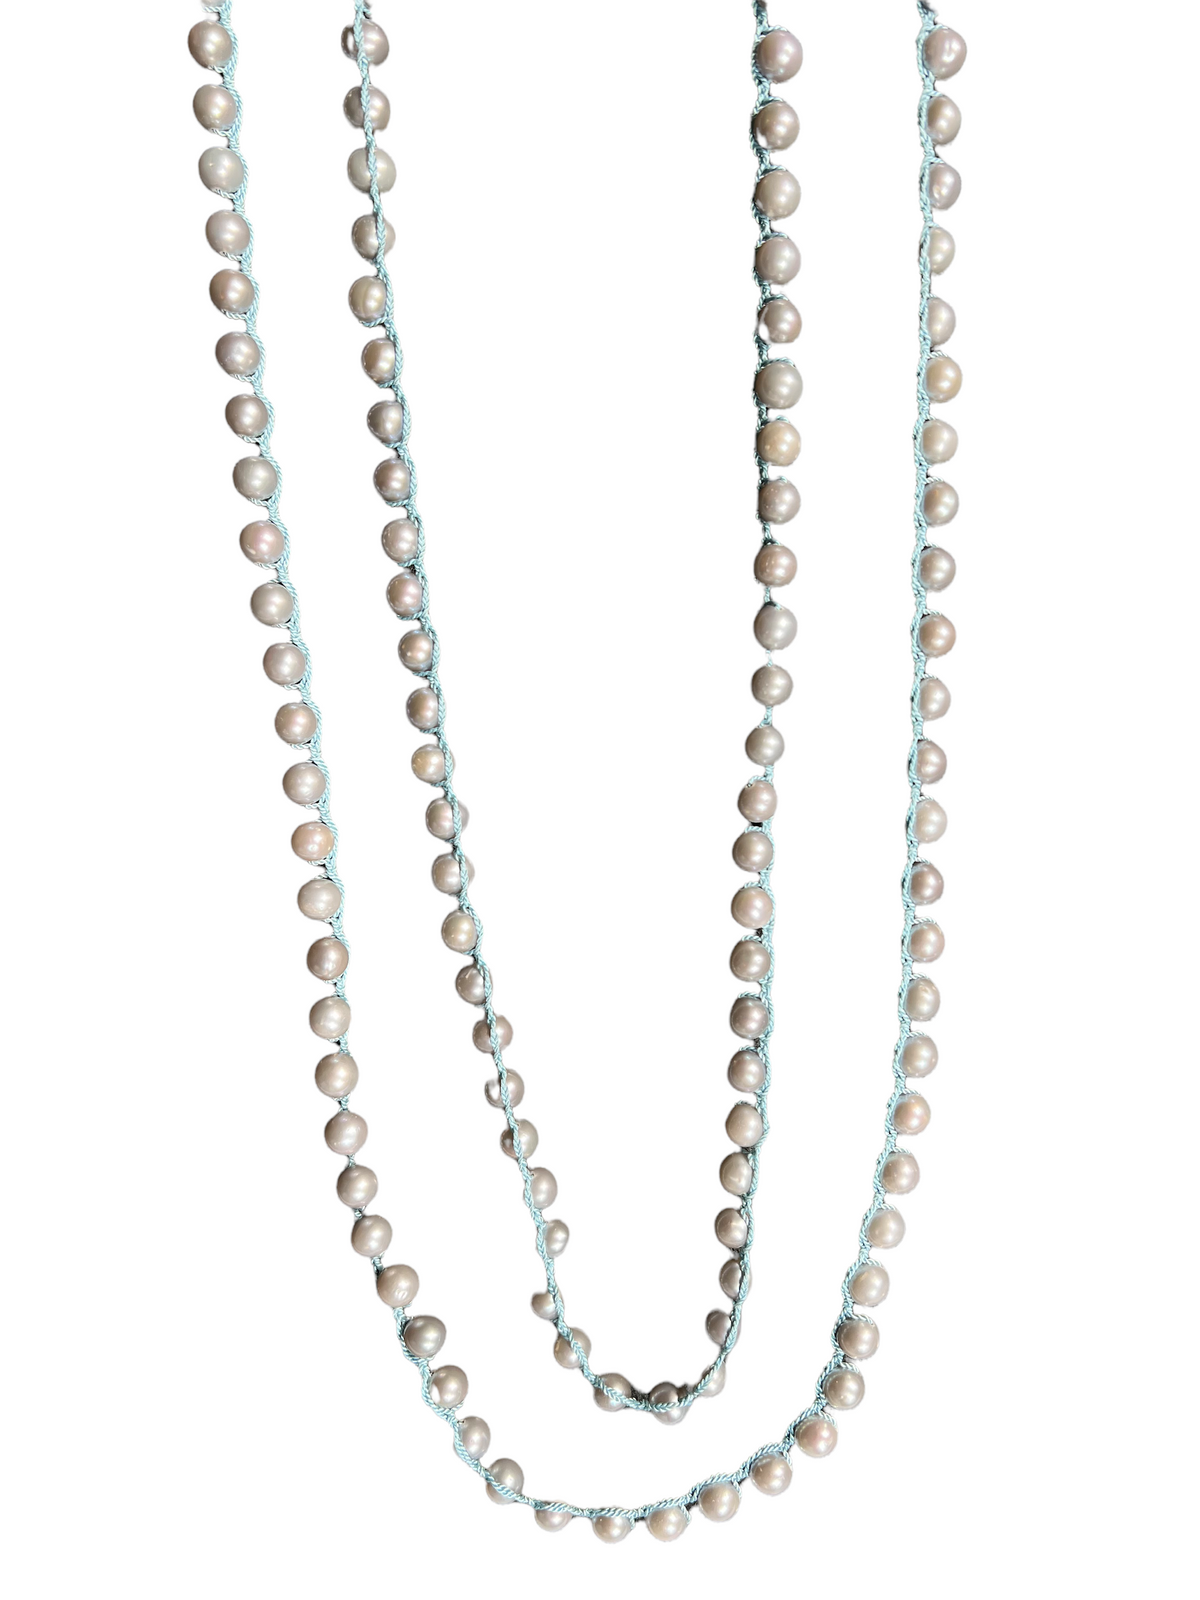 FEATHERED SOUL NECKLACE - GREY FRESHWATER PEARL ON BLUE SILK